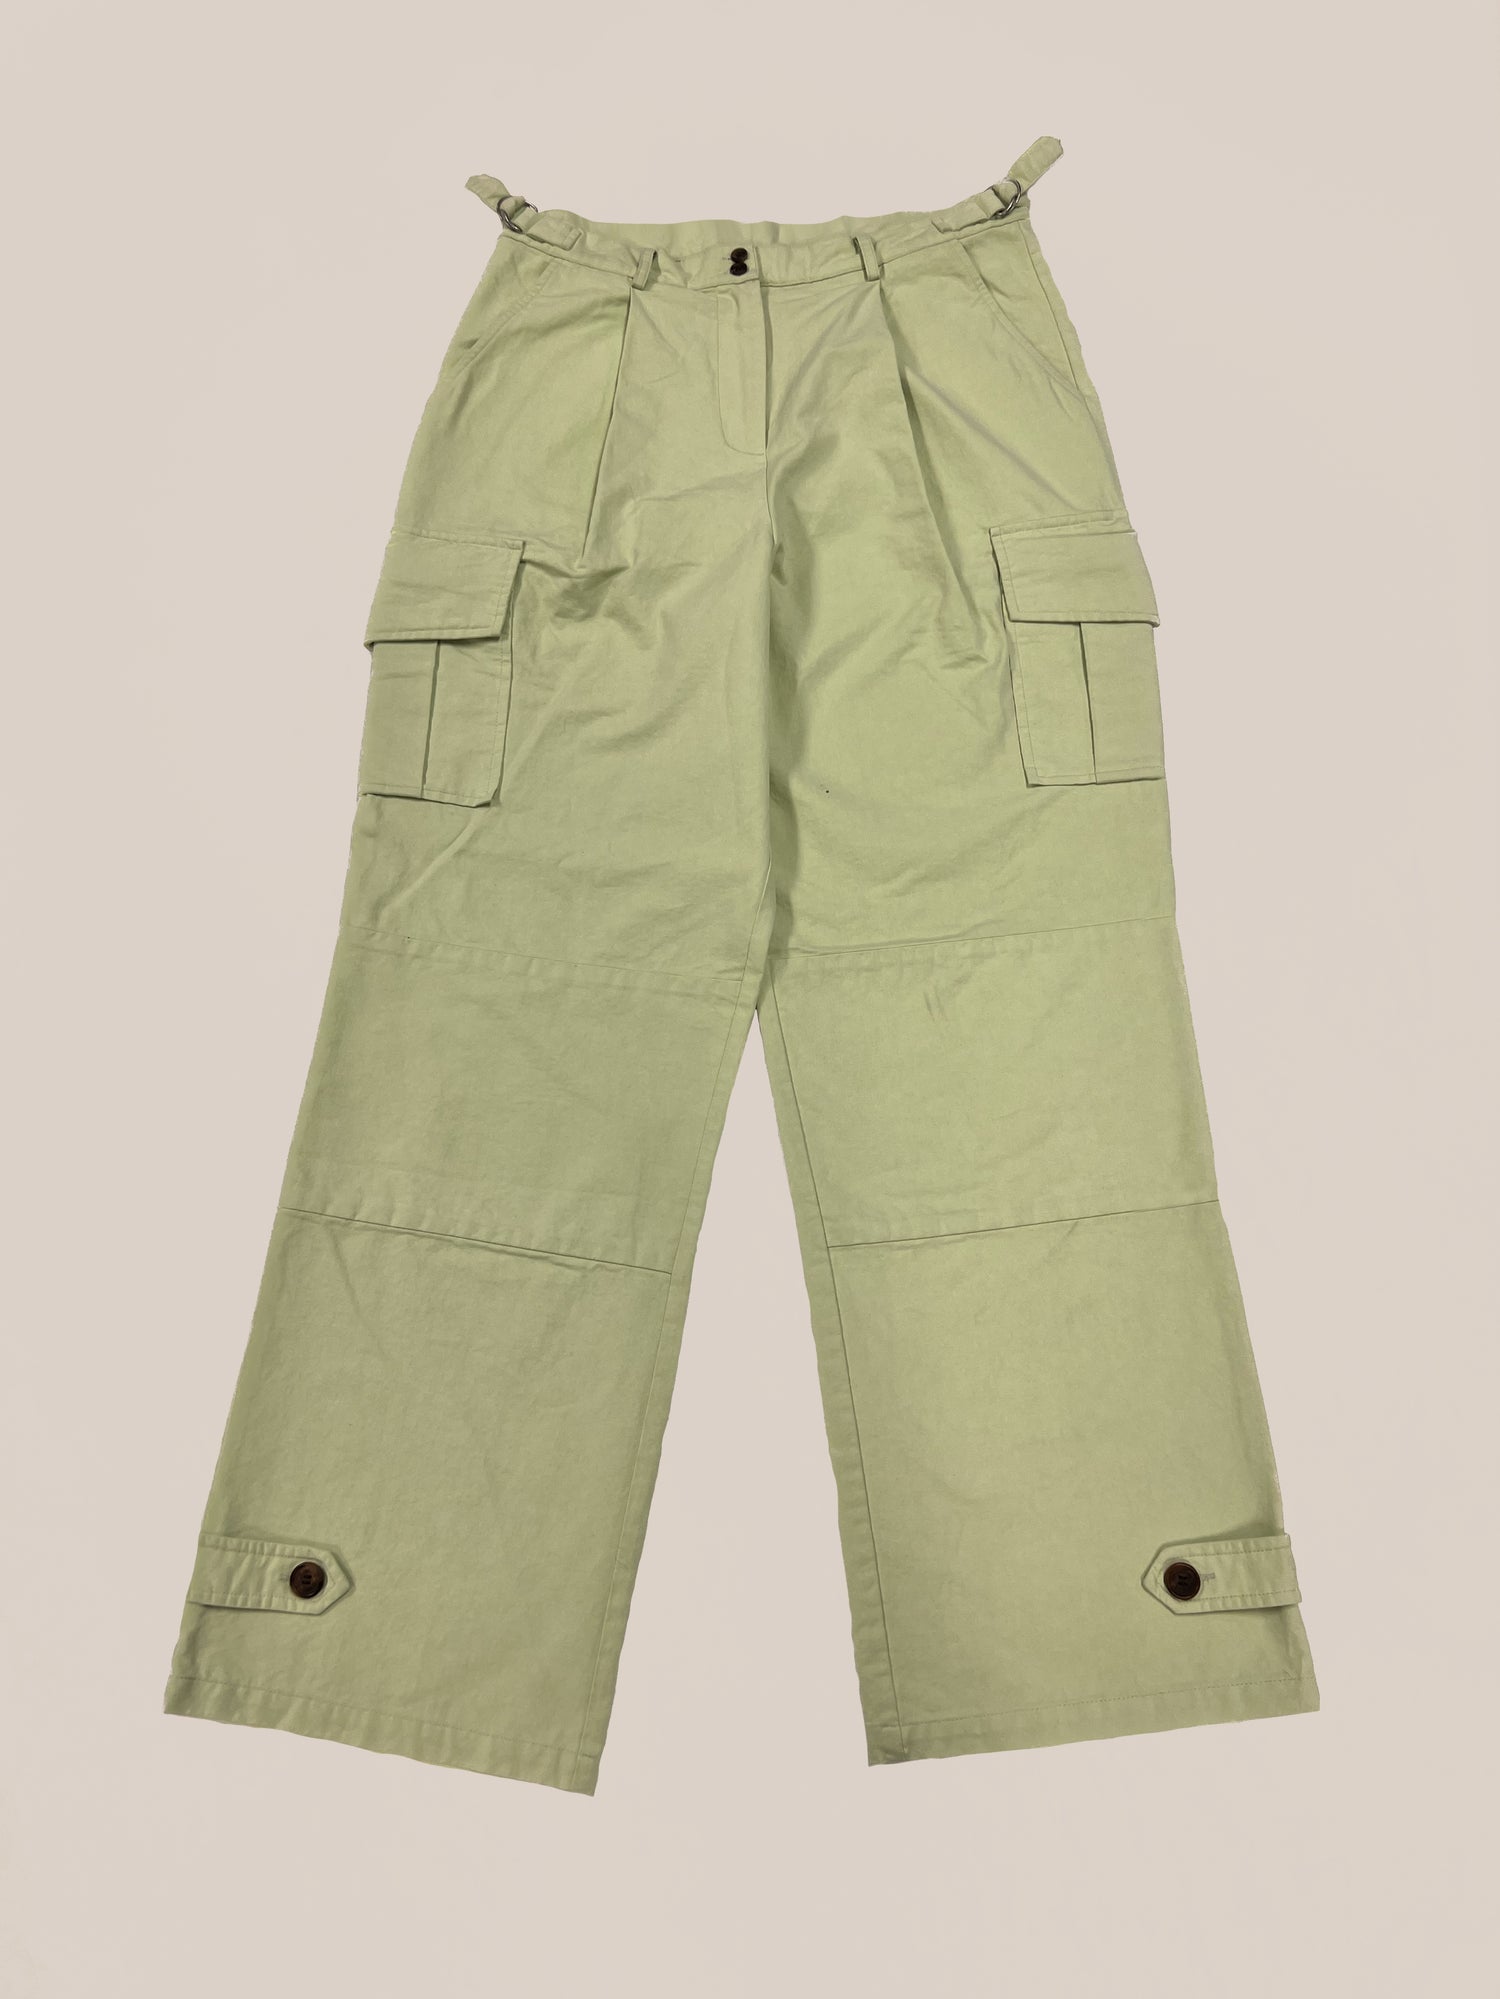 Olive green Profound Sample 55 cargo pleated pants with pockets isolated on a white background, size 32 waist.